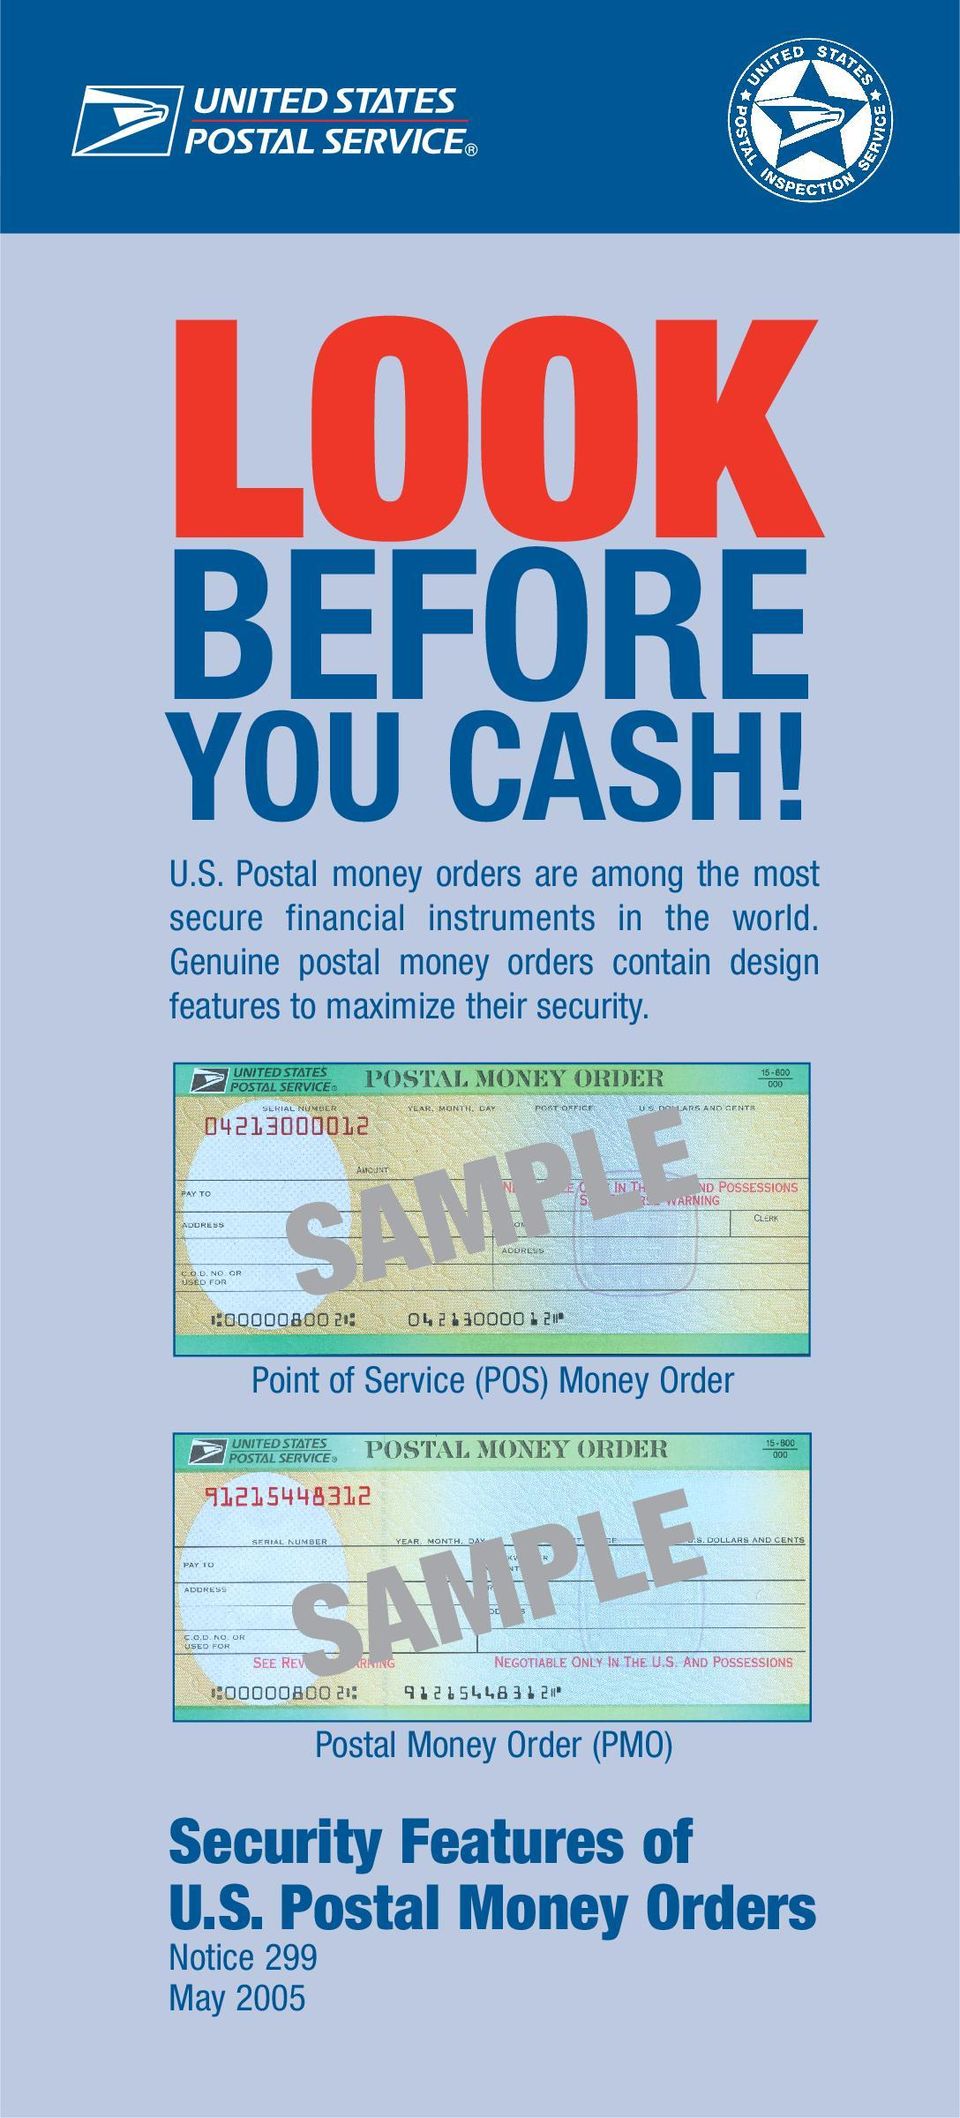 Postal money orders are among the most secure financial instruments in the world.